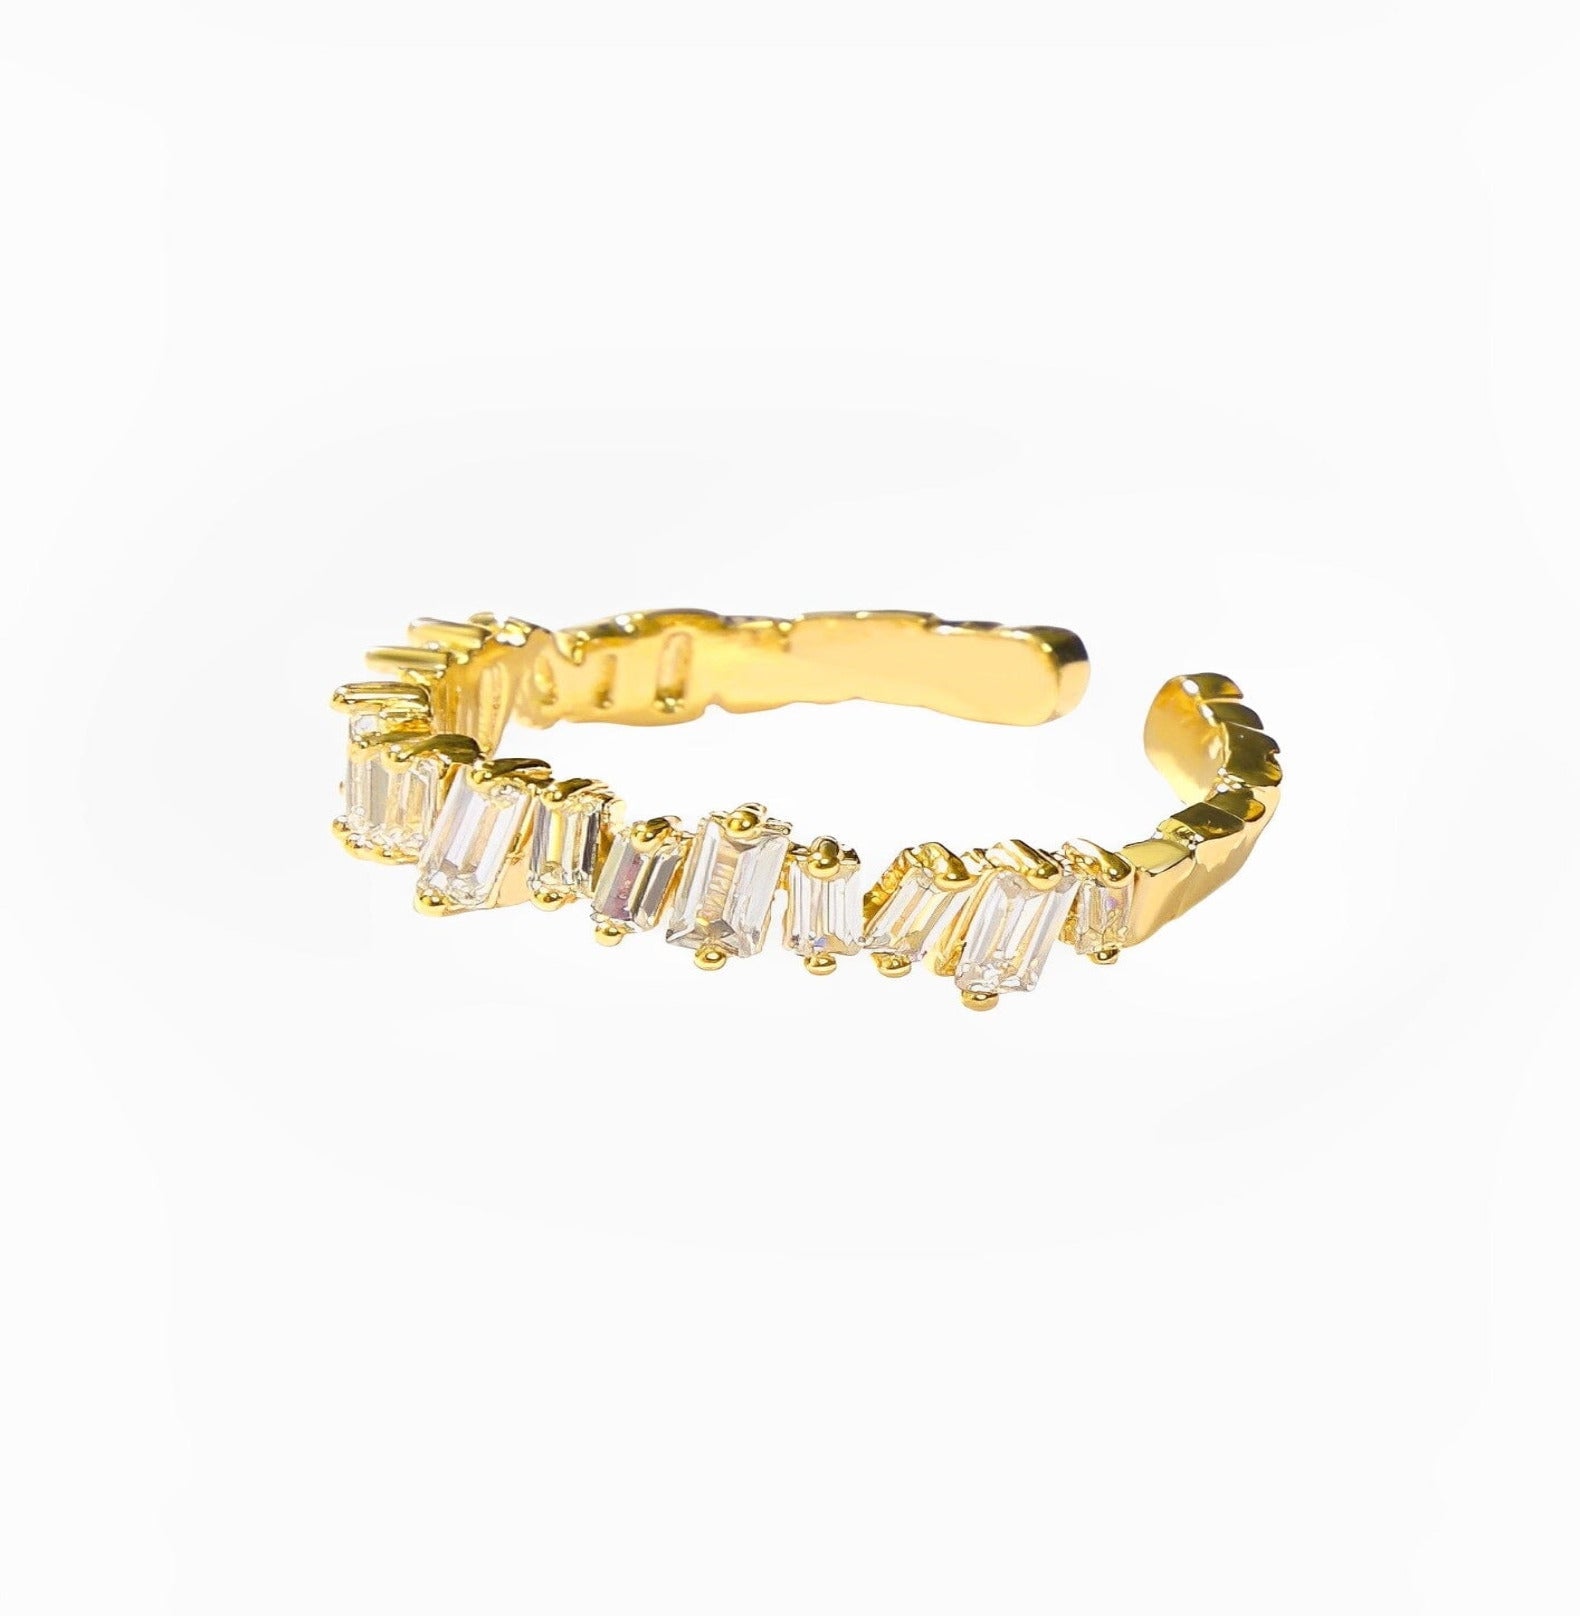 CÉLINE RING ring Yubama Jewelry Online Store - The Elegant Designs of Gold and Silver ! 